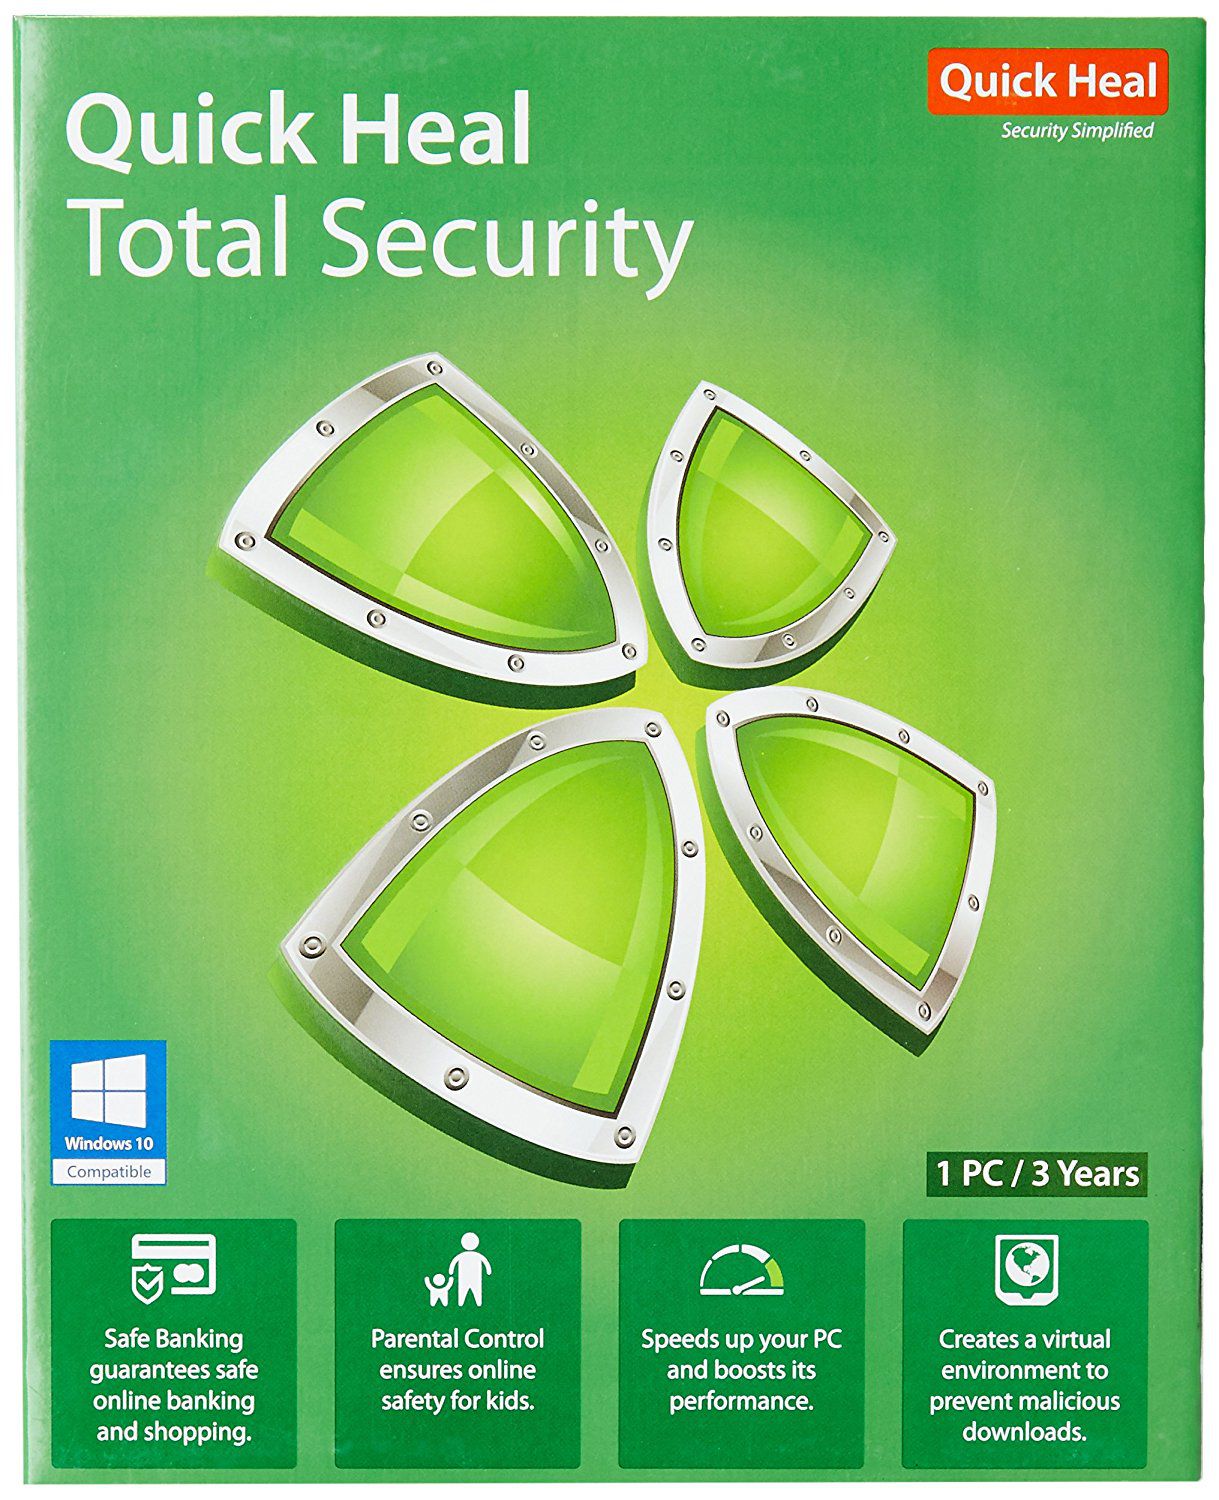     			Quick Heal Total Security Antivirus Latest Version ( 1 PC / 3 Year ) - DVD